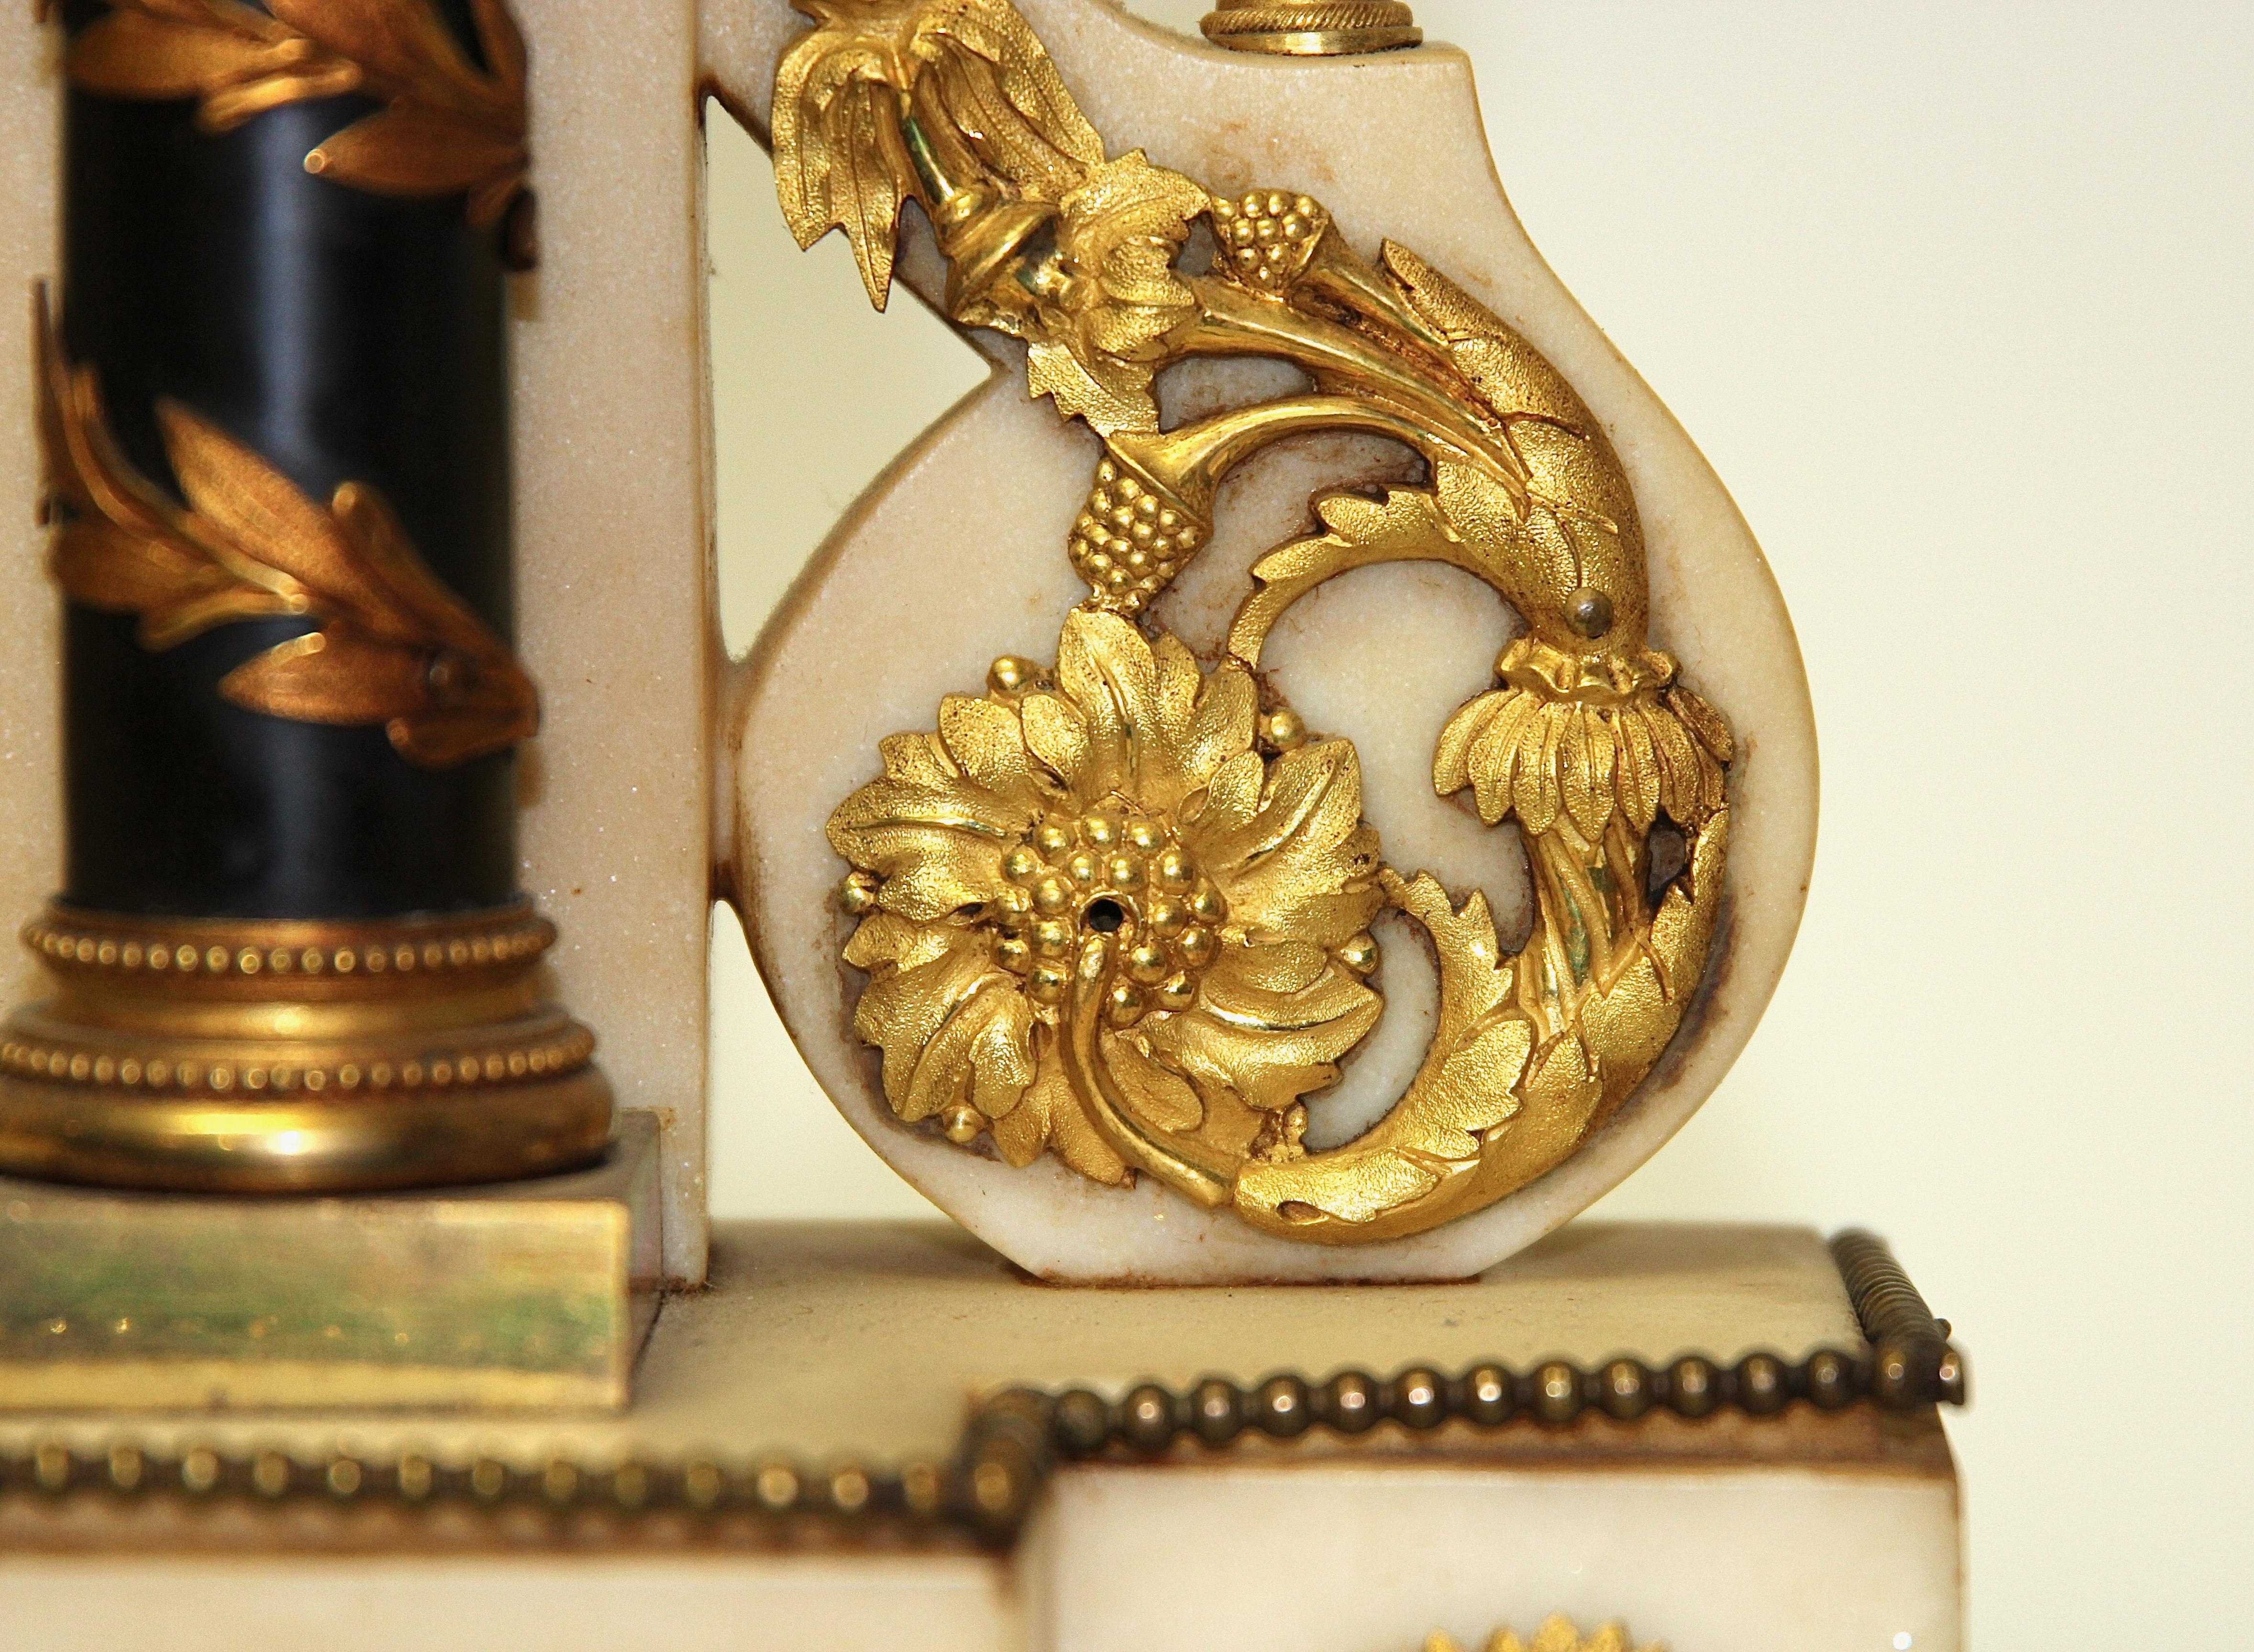 French Empire Ormolu Mantel Clock by Deverberie a Paris, Fire-Gilded For Sale 1